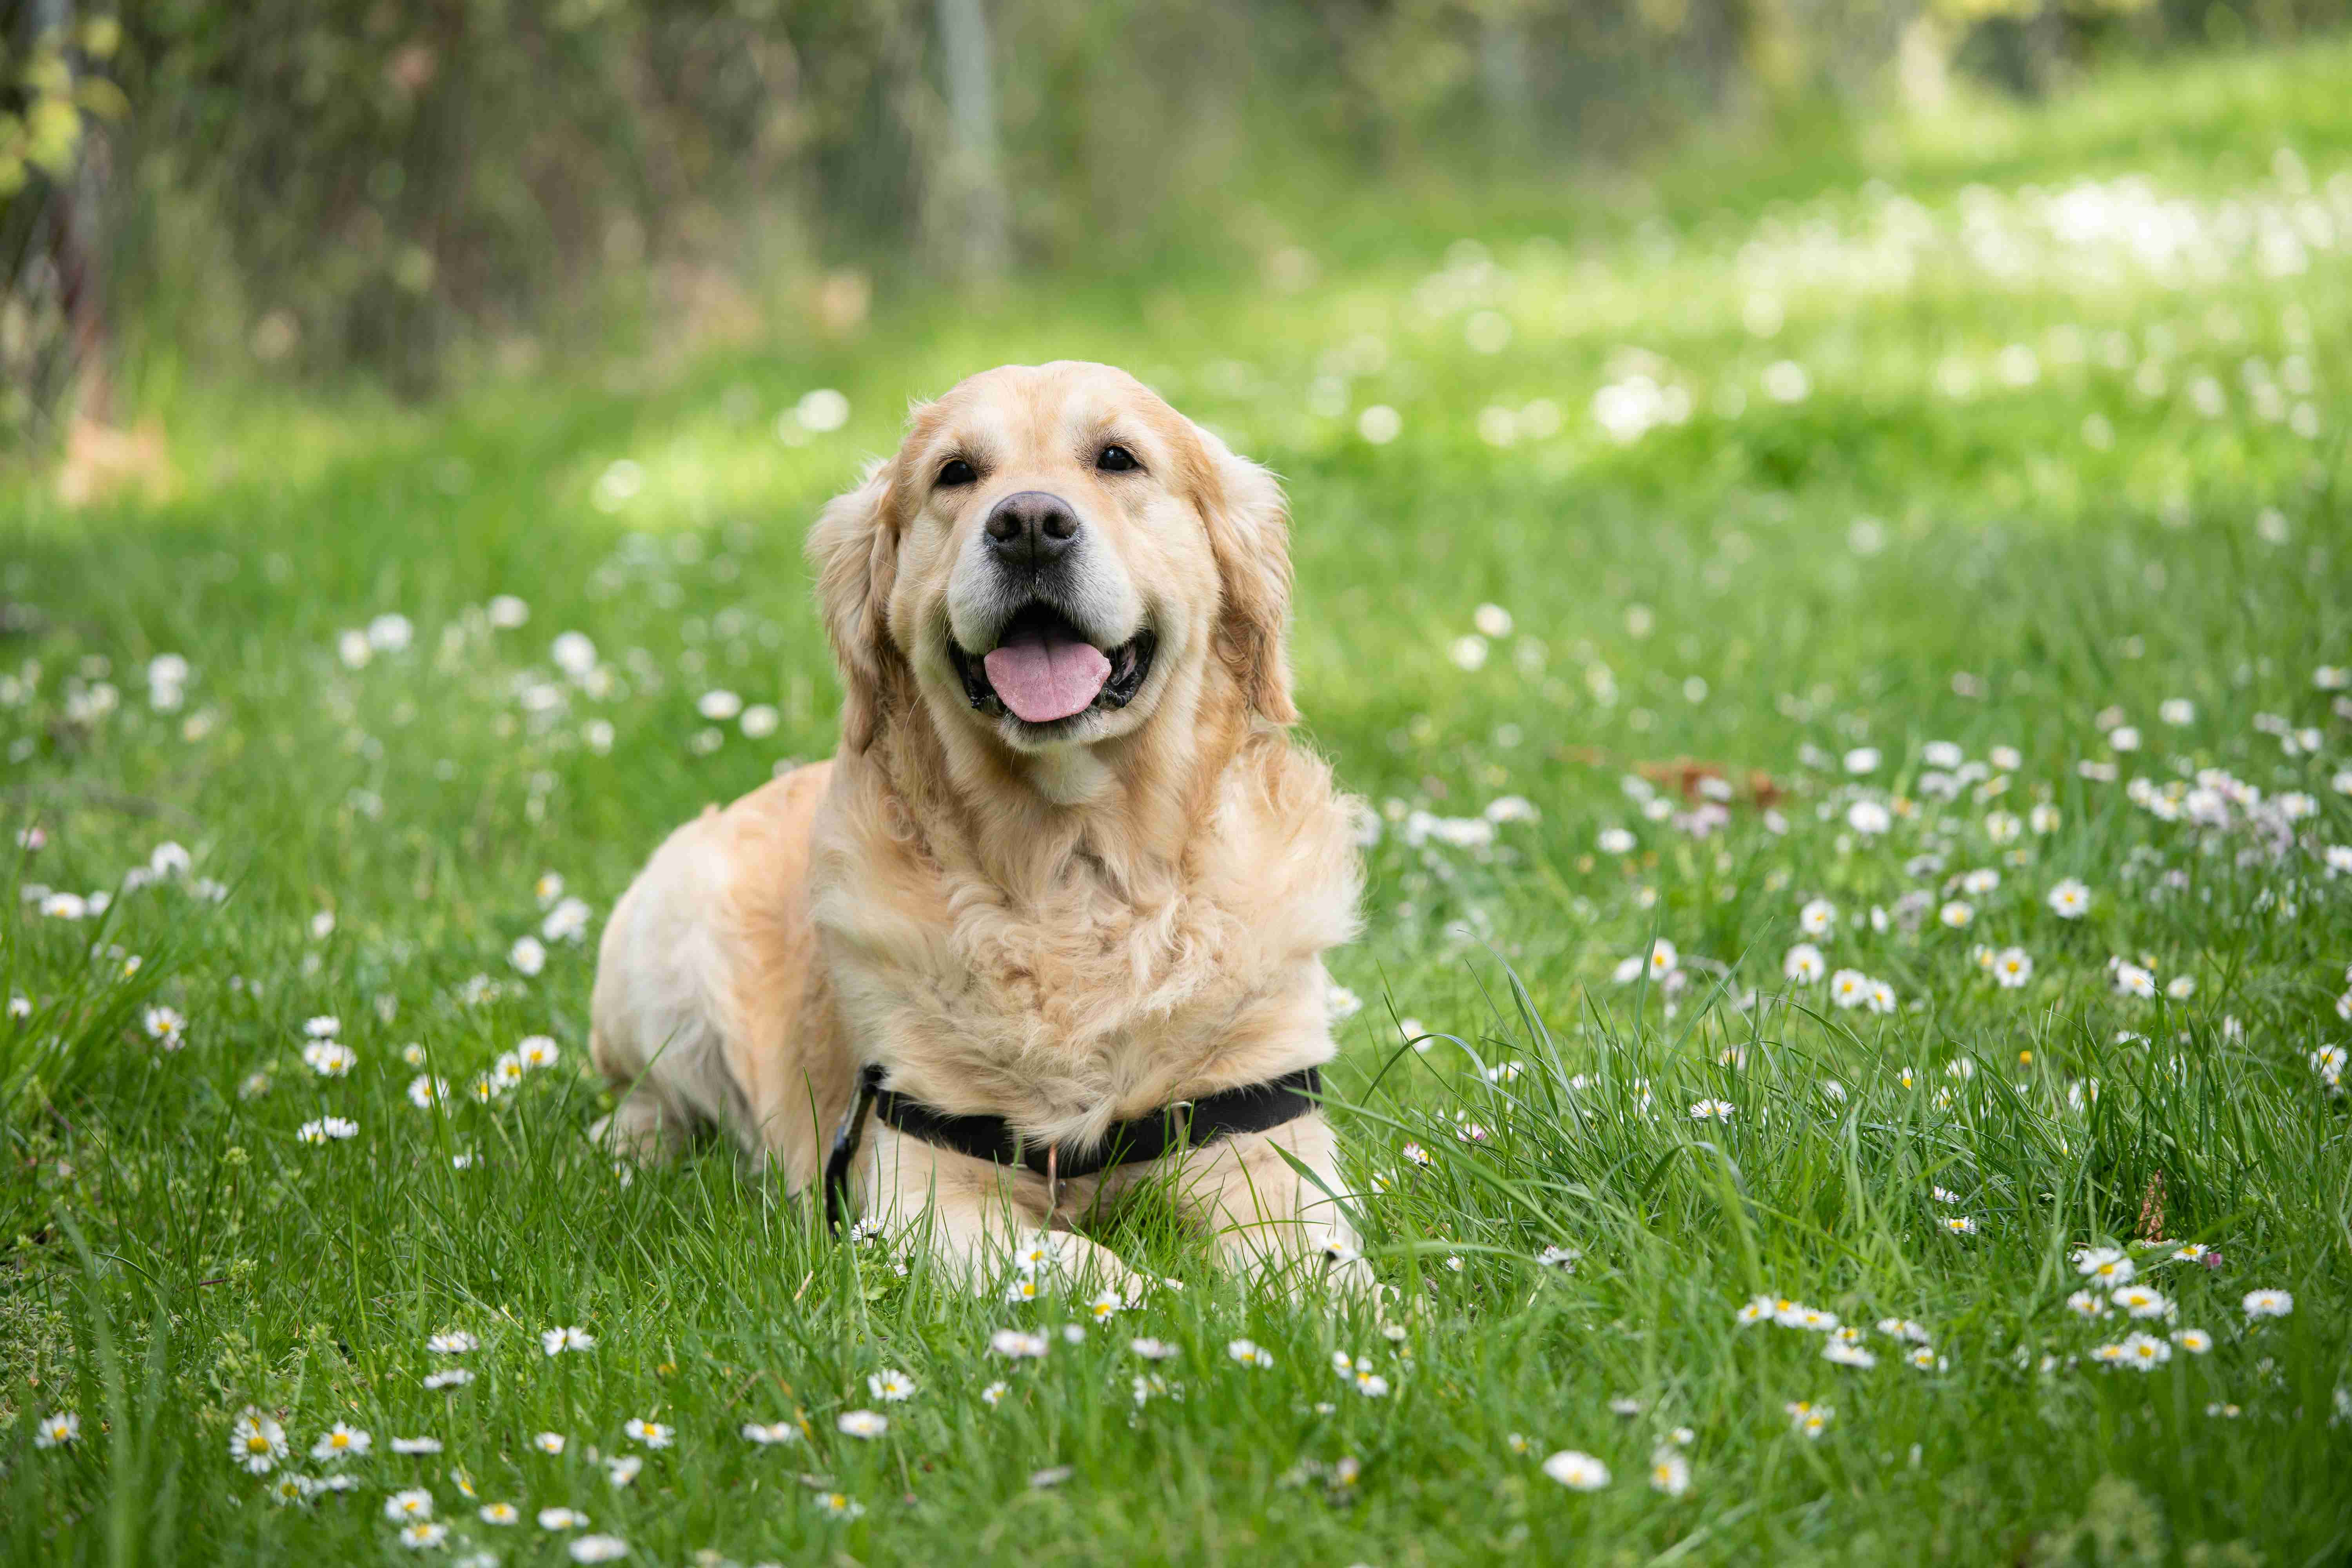 10 Warning Signs Your Labrador Retriever Might Have a Grooming-Related Health Issue